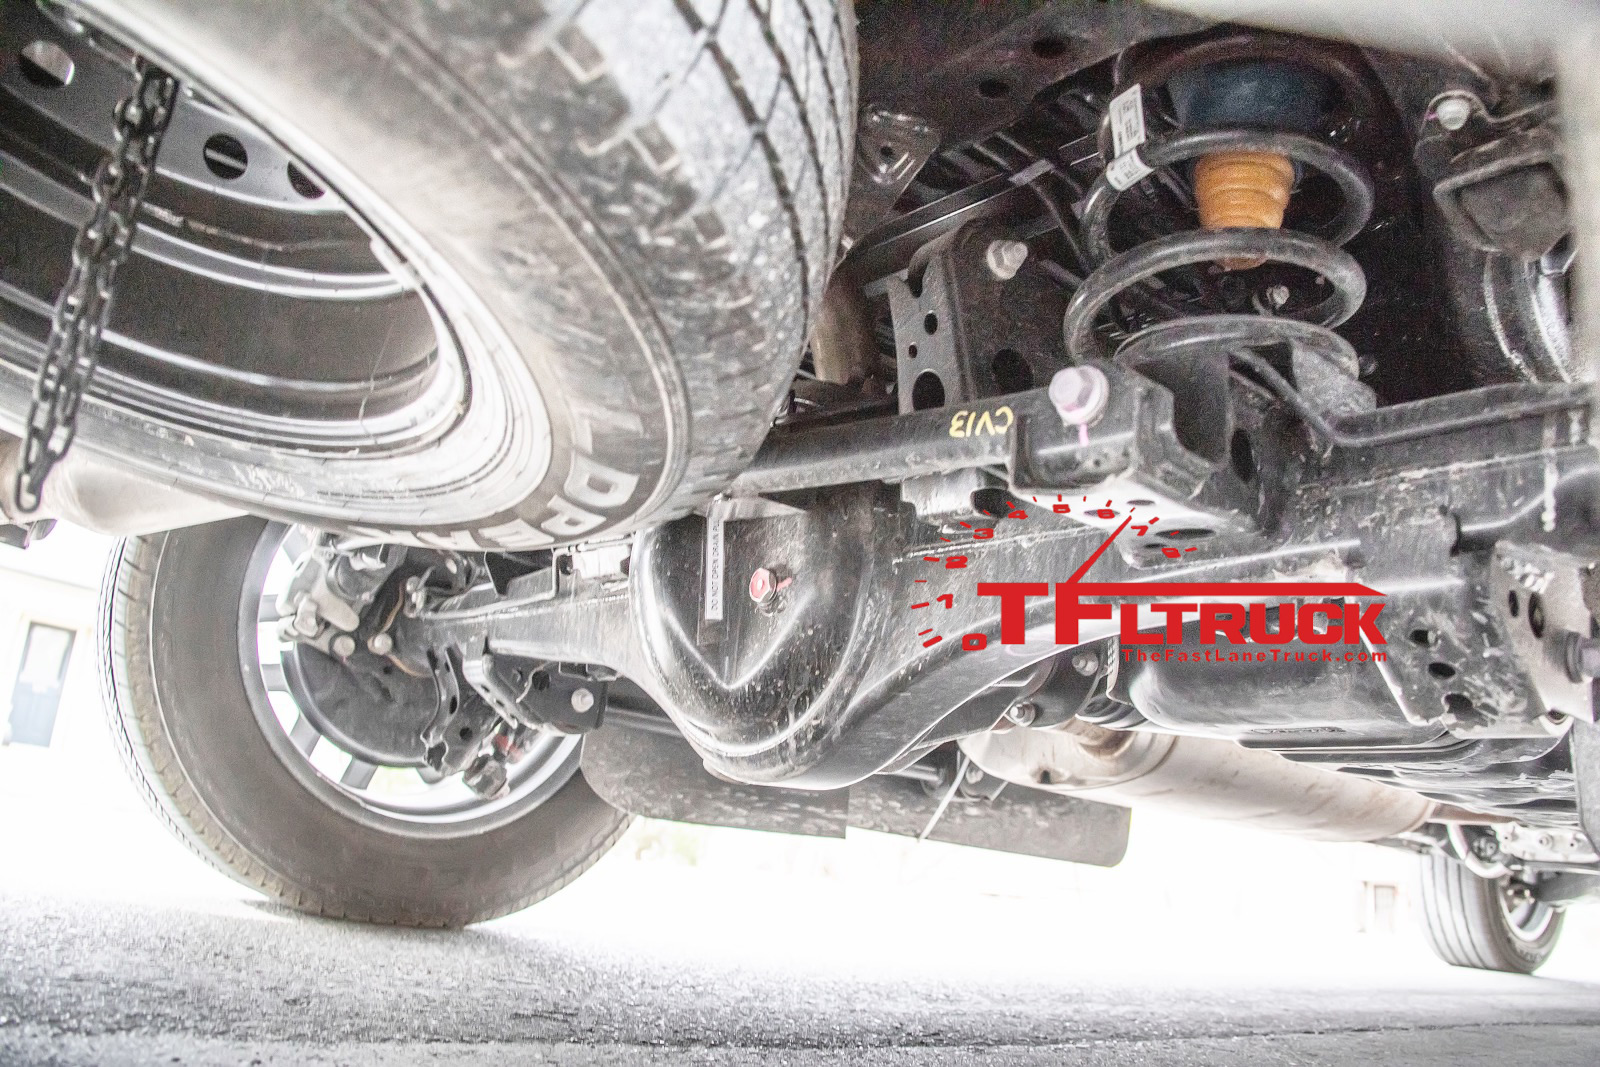 SPIED: This 2022 Toyota Tundra Is Hiding Coil Spring Rear Suspension